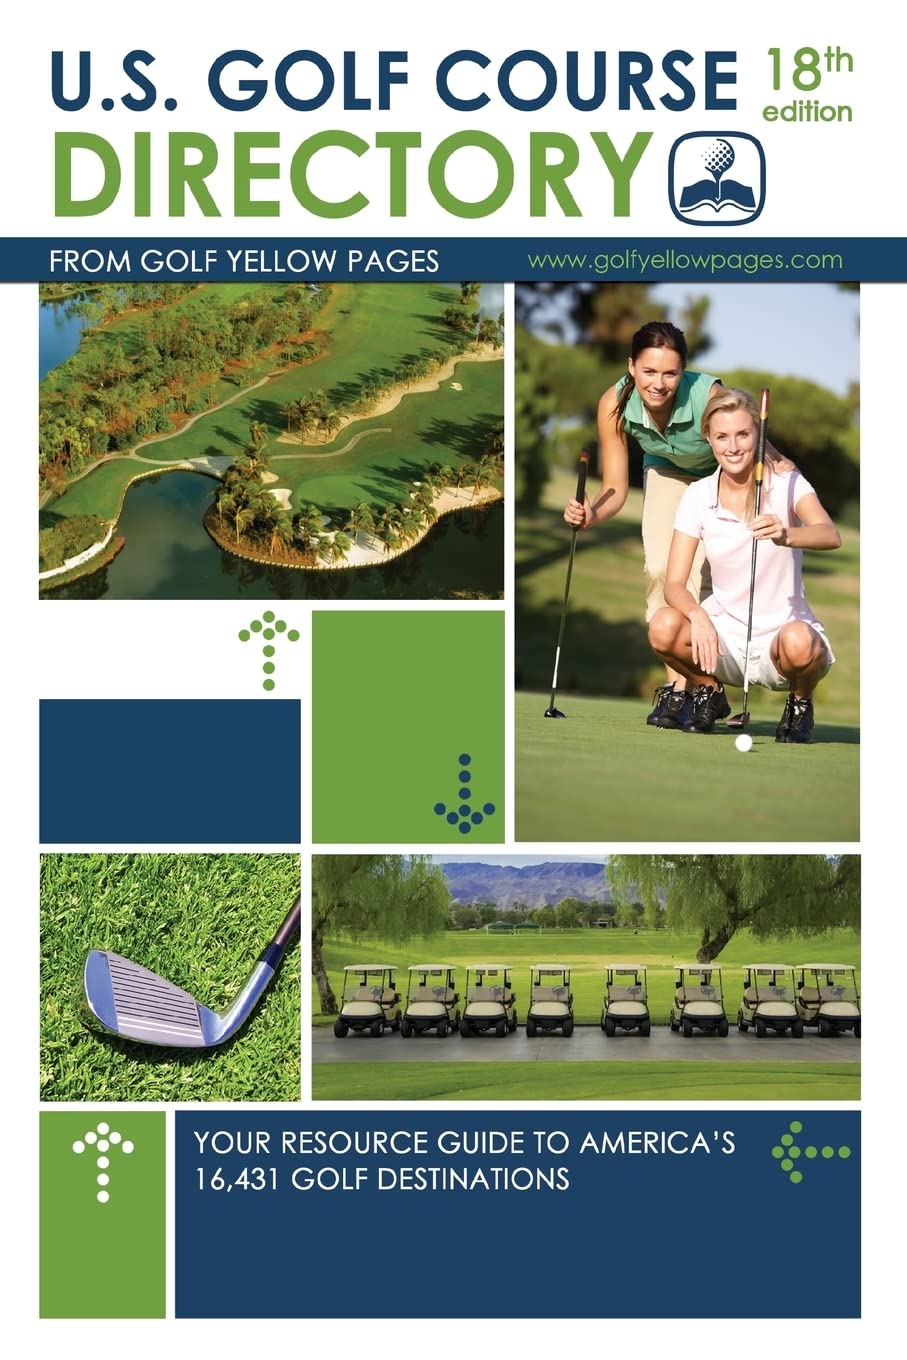 U.S. Golf Course Directory: Your Resource Guide to America's 16,431 Golf Destinations (Golf Yellow Pages)